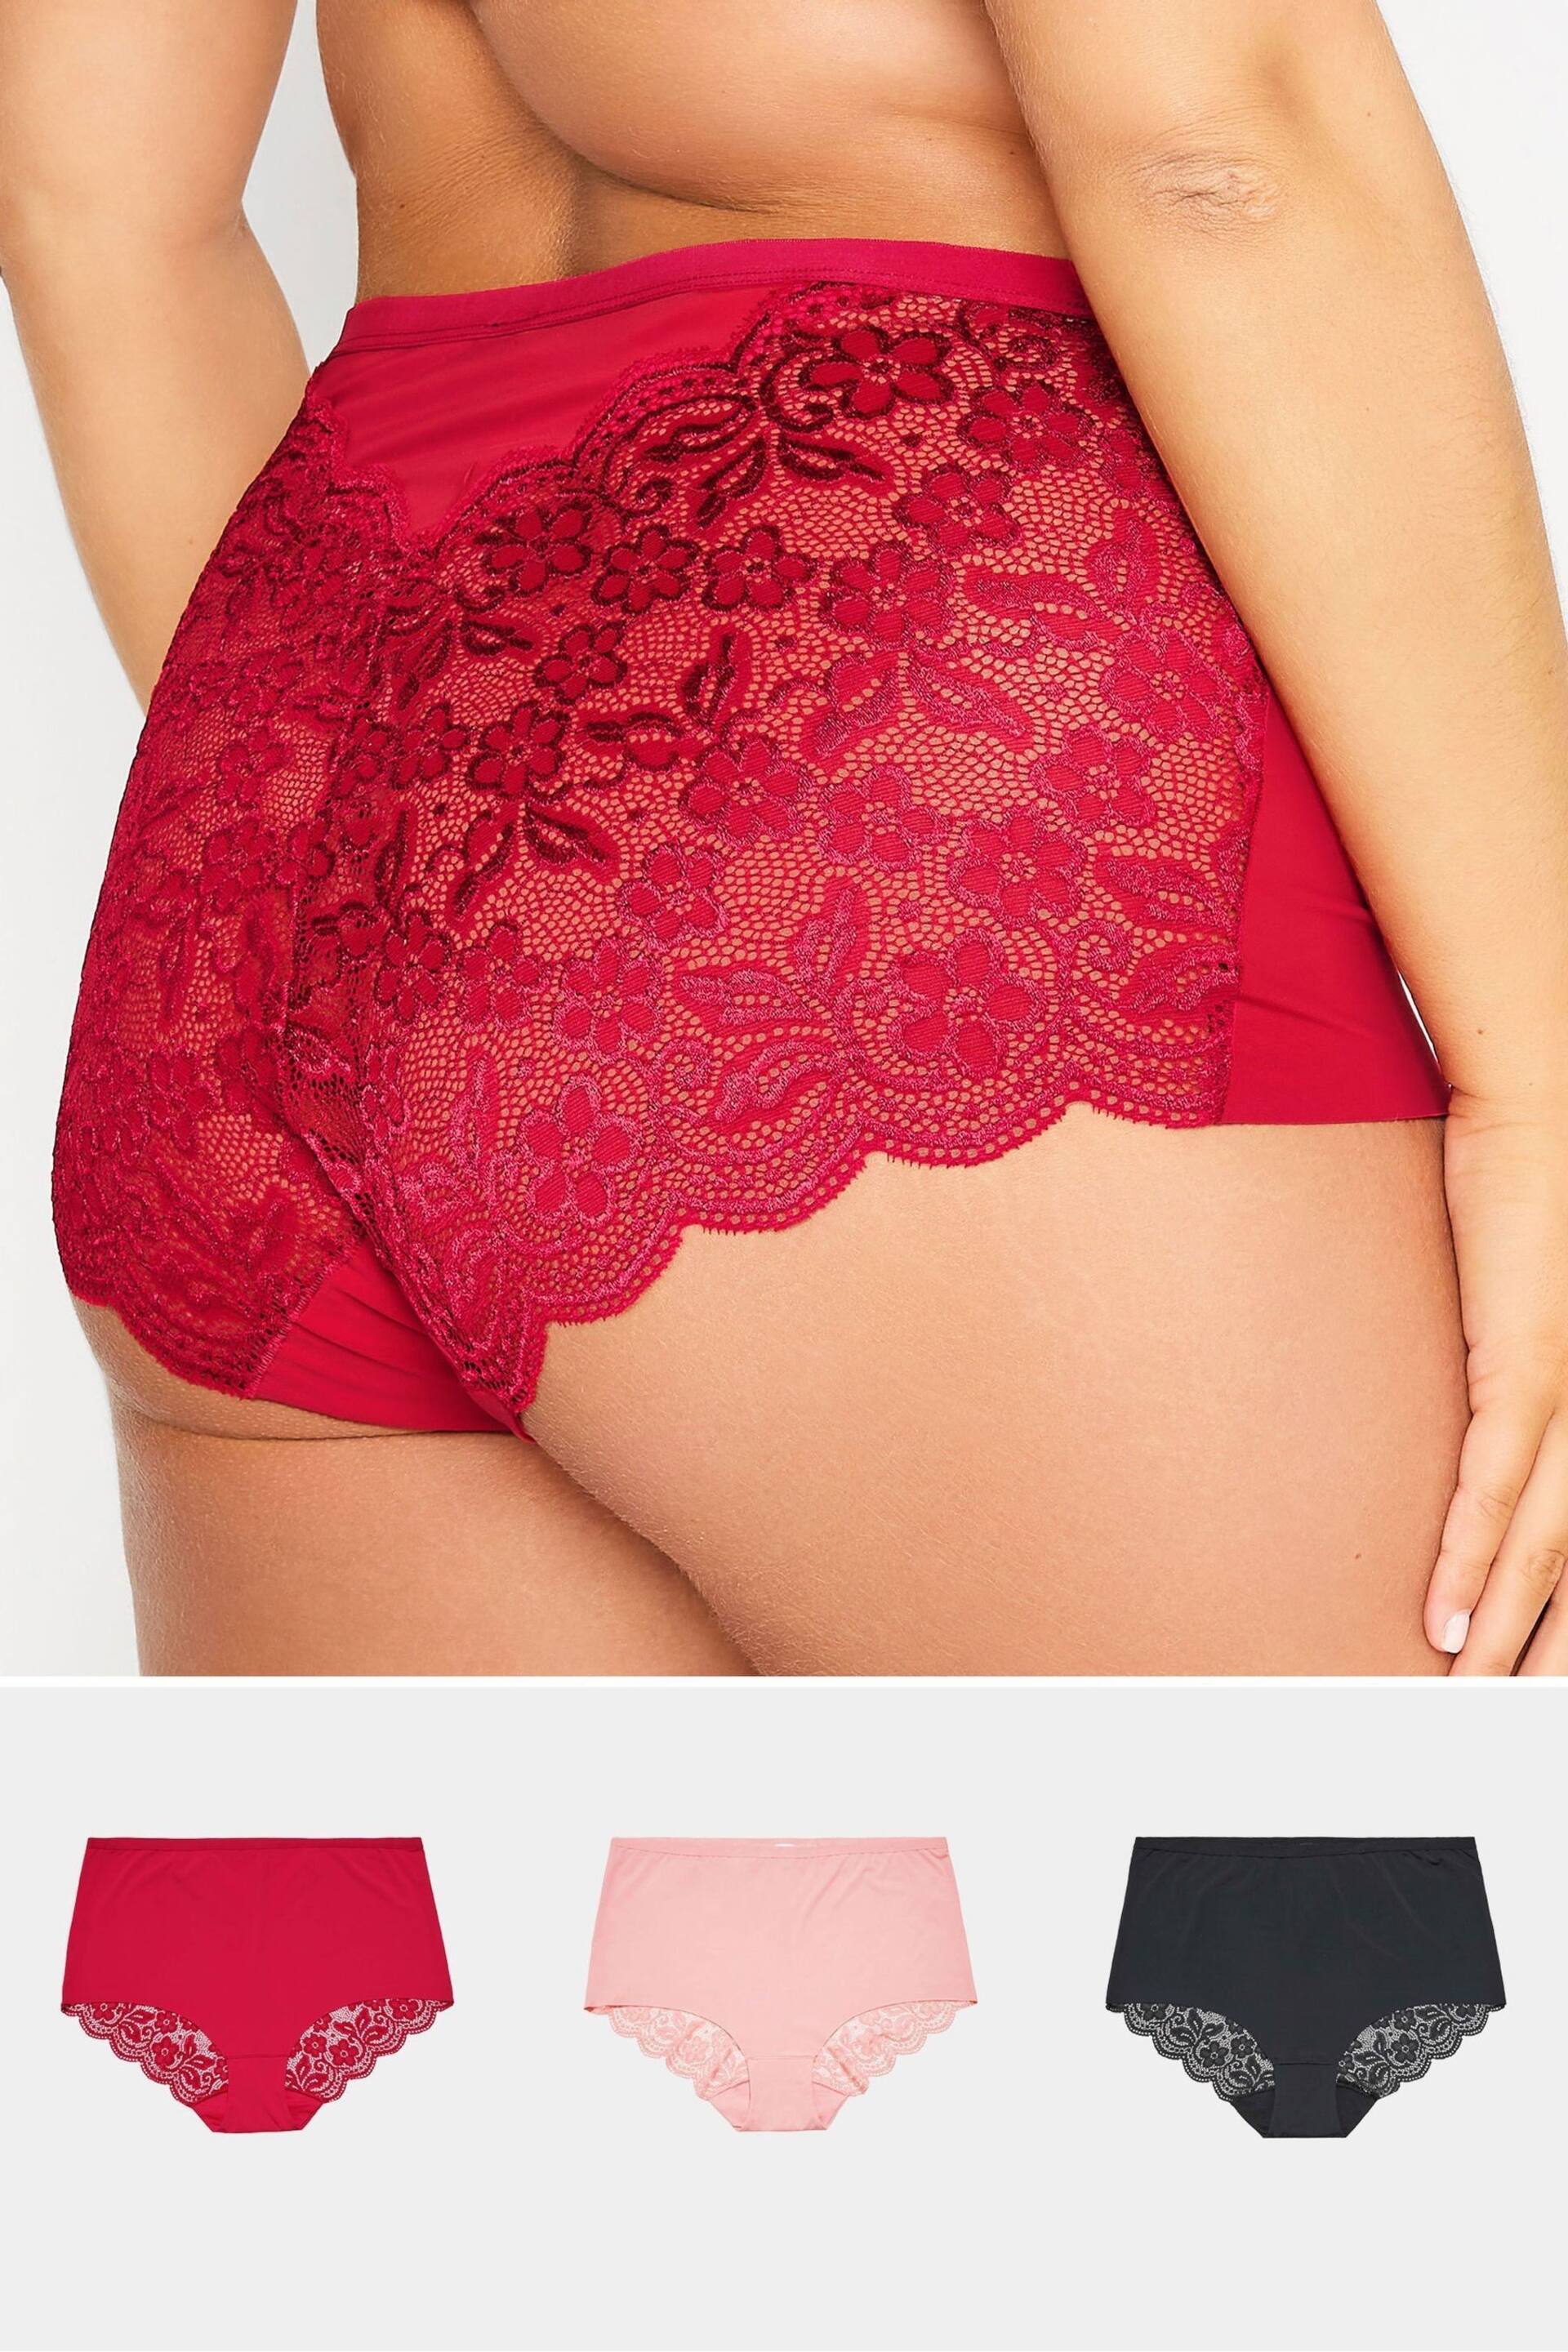 Yours Curve Pink Lace Mid Rise Shorts 3 Pack - Image 1 of 3